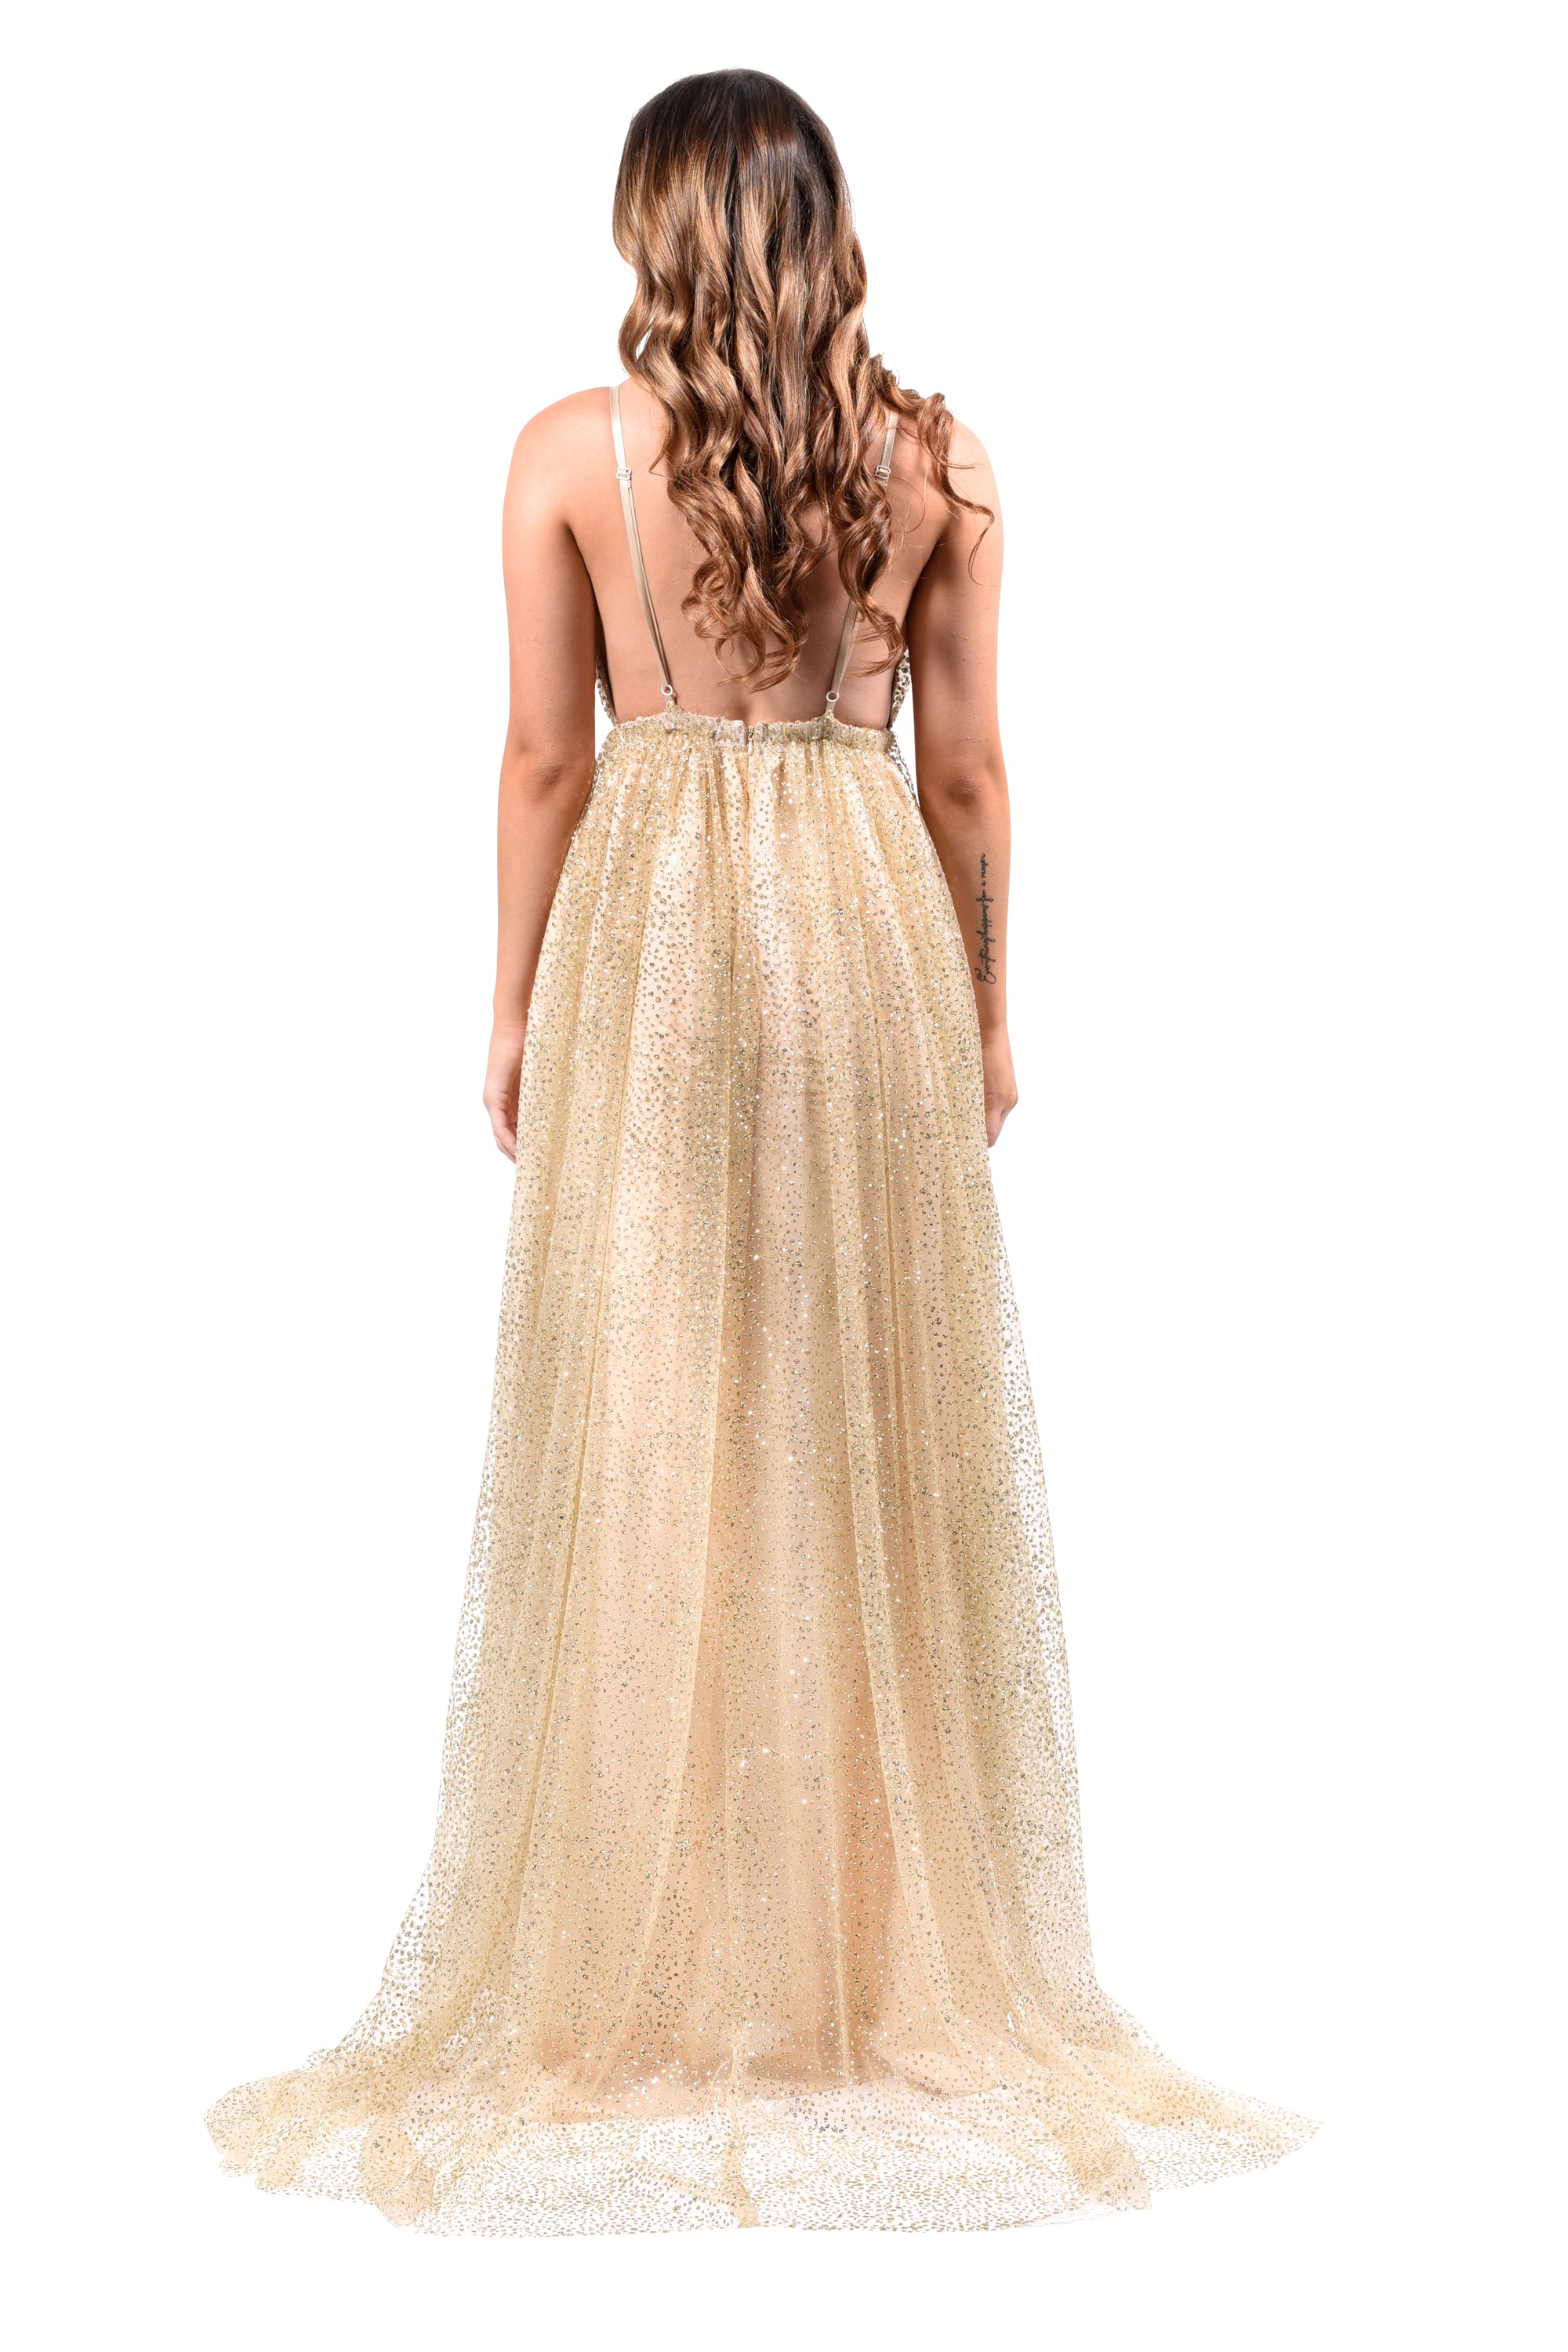 Honey Couture GEORGIA Gold Glitter Formal Gown Private Label$ AfterPay Humm ZipPay LayBuy Sezzle